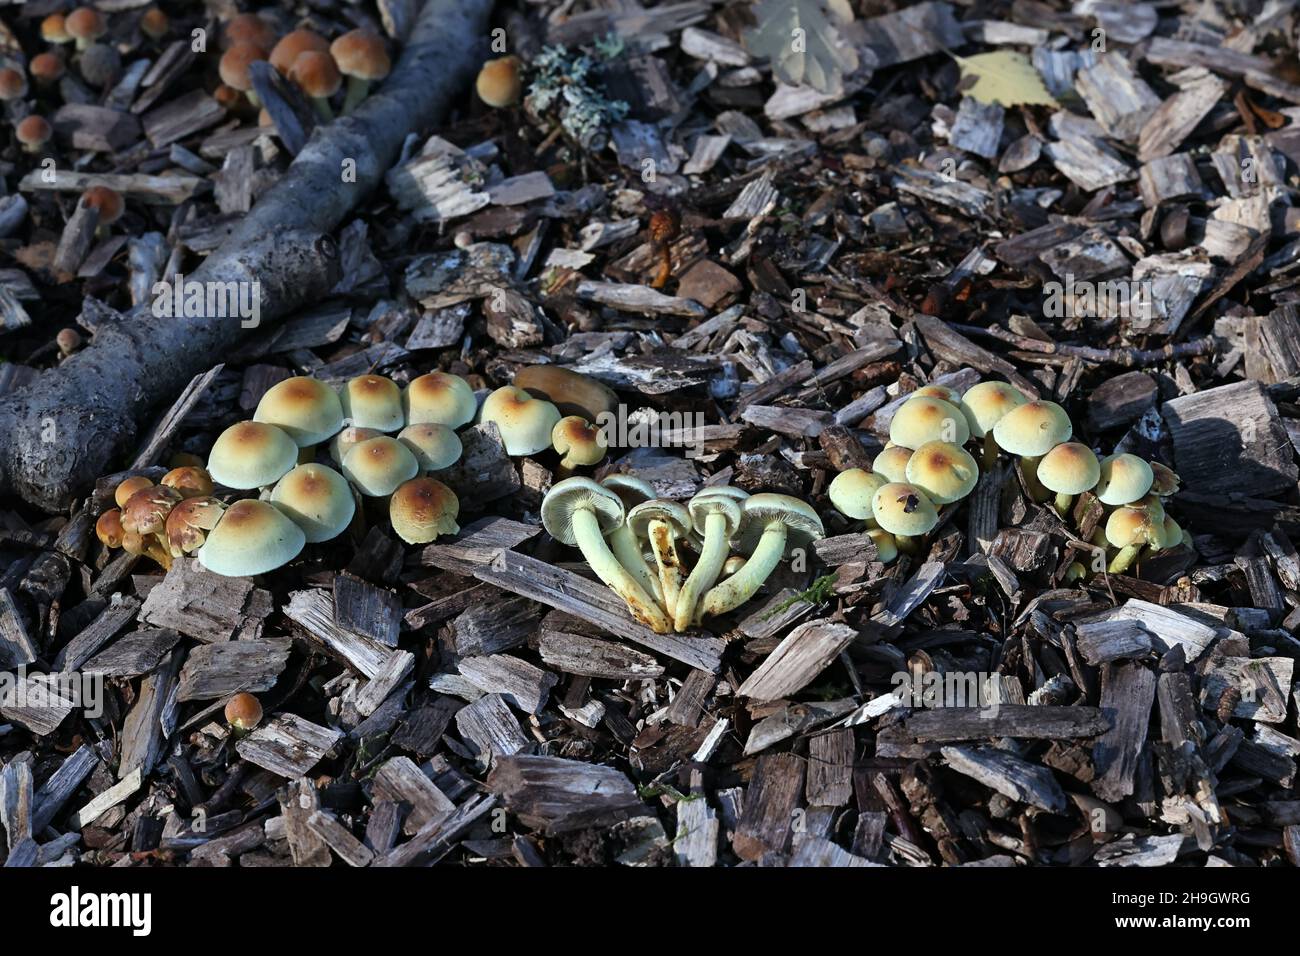 Hypholoma fasciculare, known as sulphur tuft, sulfur tuft or clustered woodlover, poisonous mushroom from Finland Stock Photo